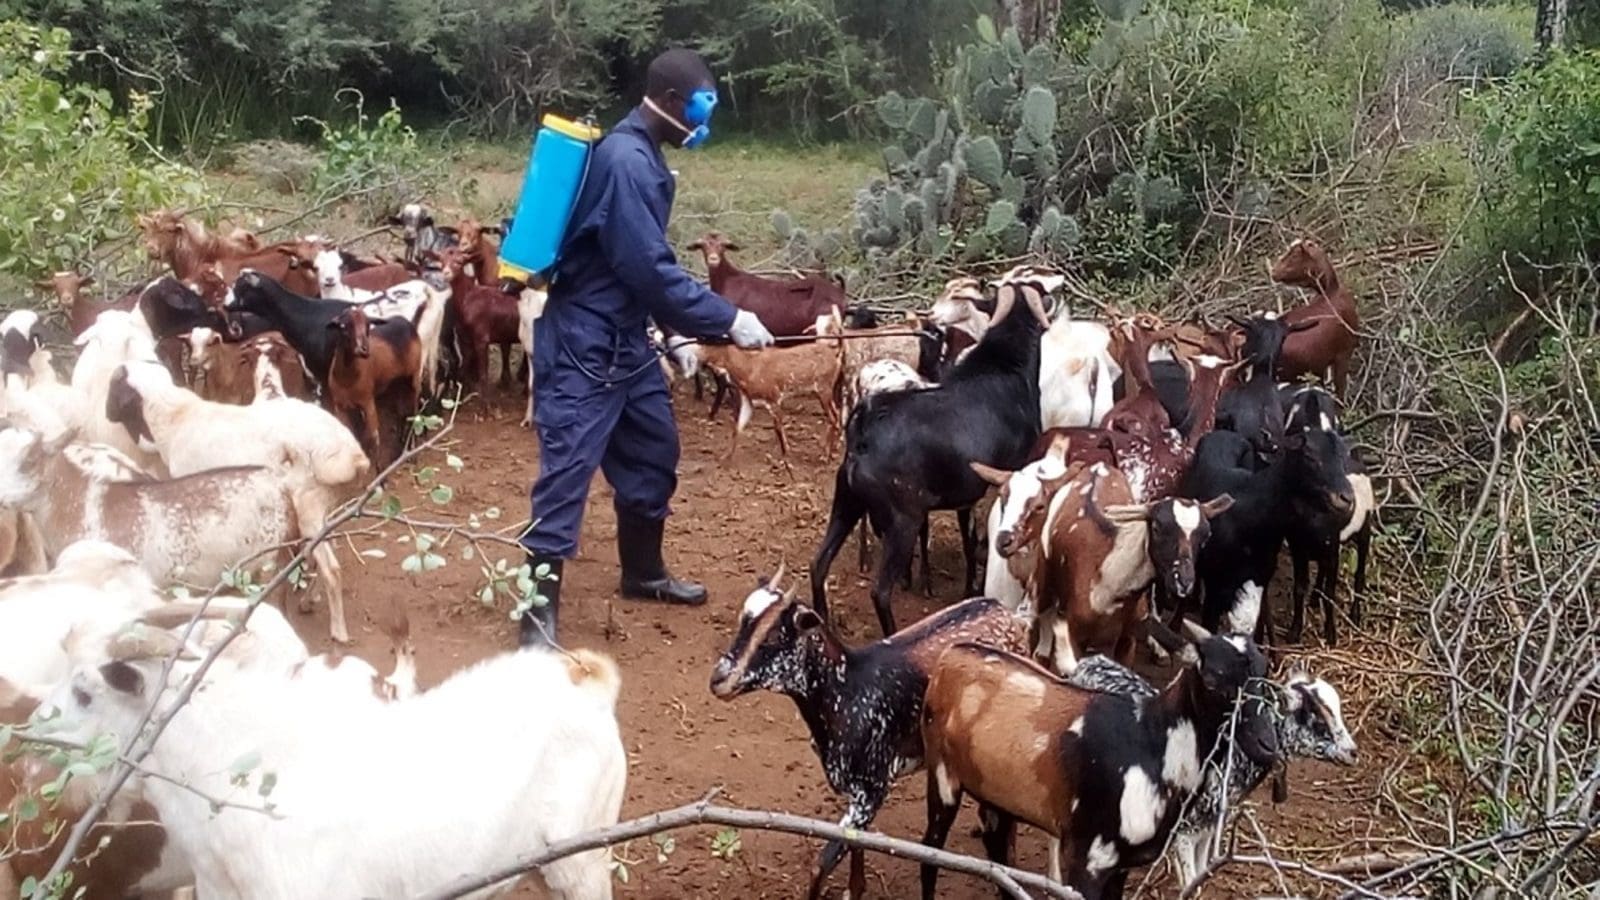 Uganda confirms cases of goat plague, urges farmers to be calm as vaccination starts